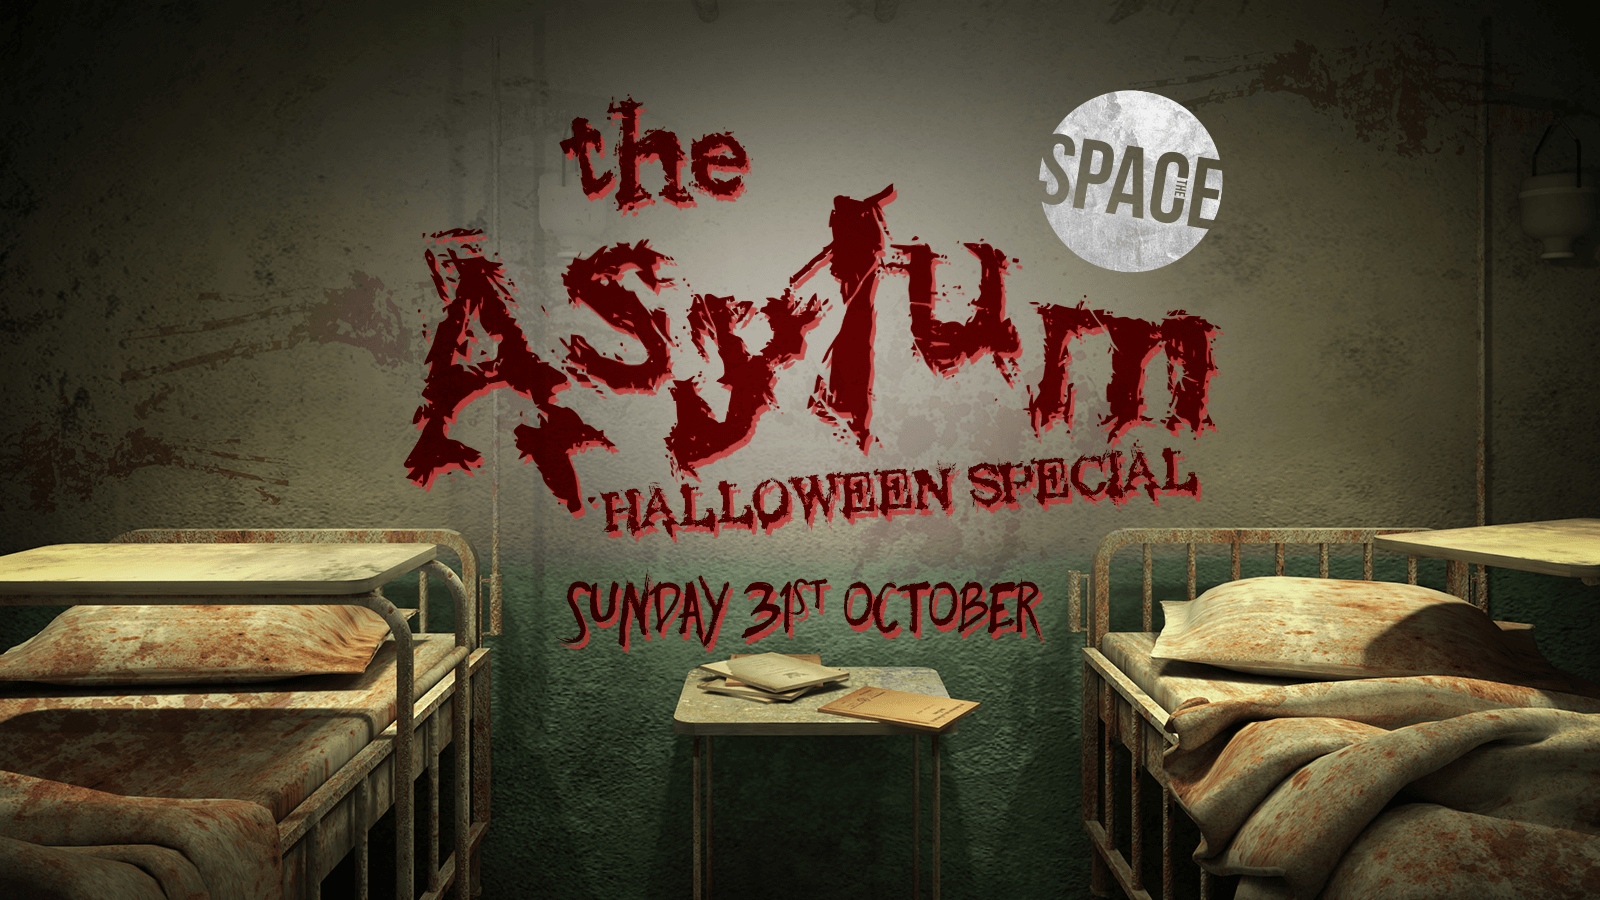 The Asylum Halloween Special at Space –  31st October